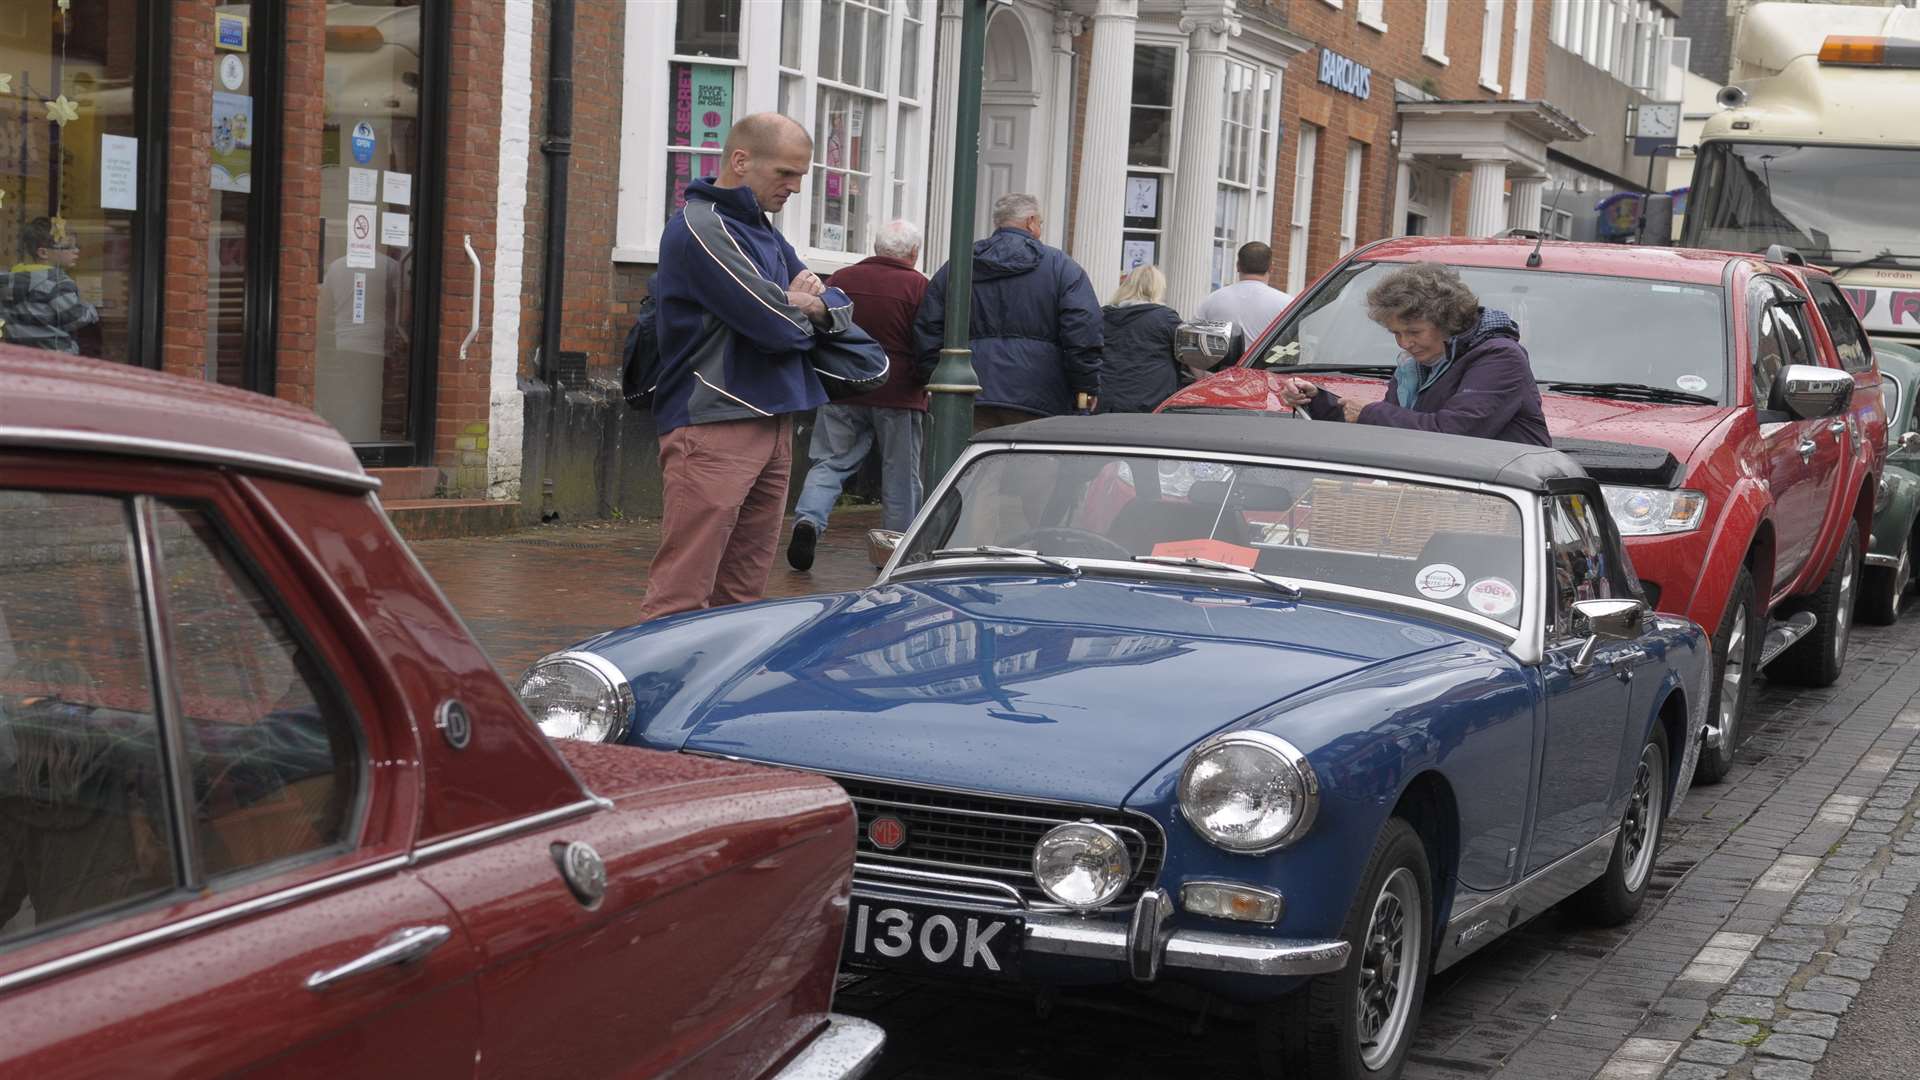 A classic car display is planned for the celebrations